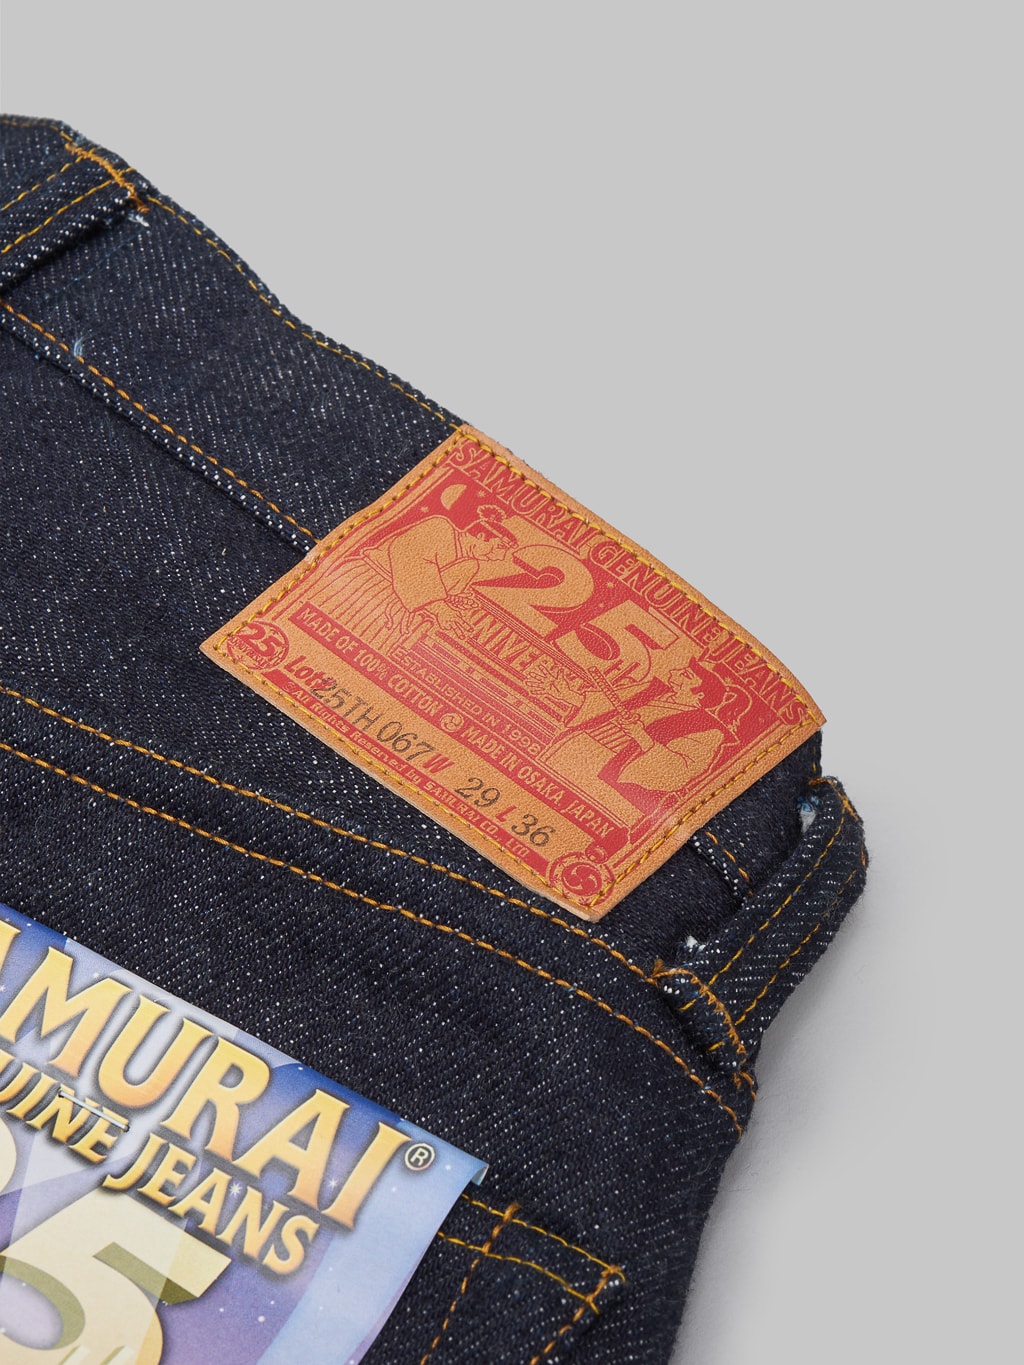 samurai jeans s710xx 25oz 25th anniversary selvedge jeans leather patch